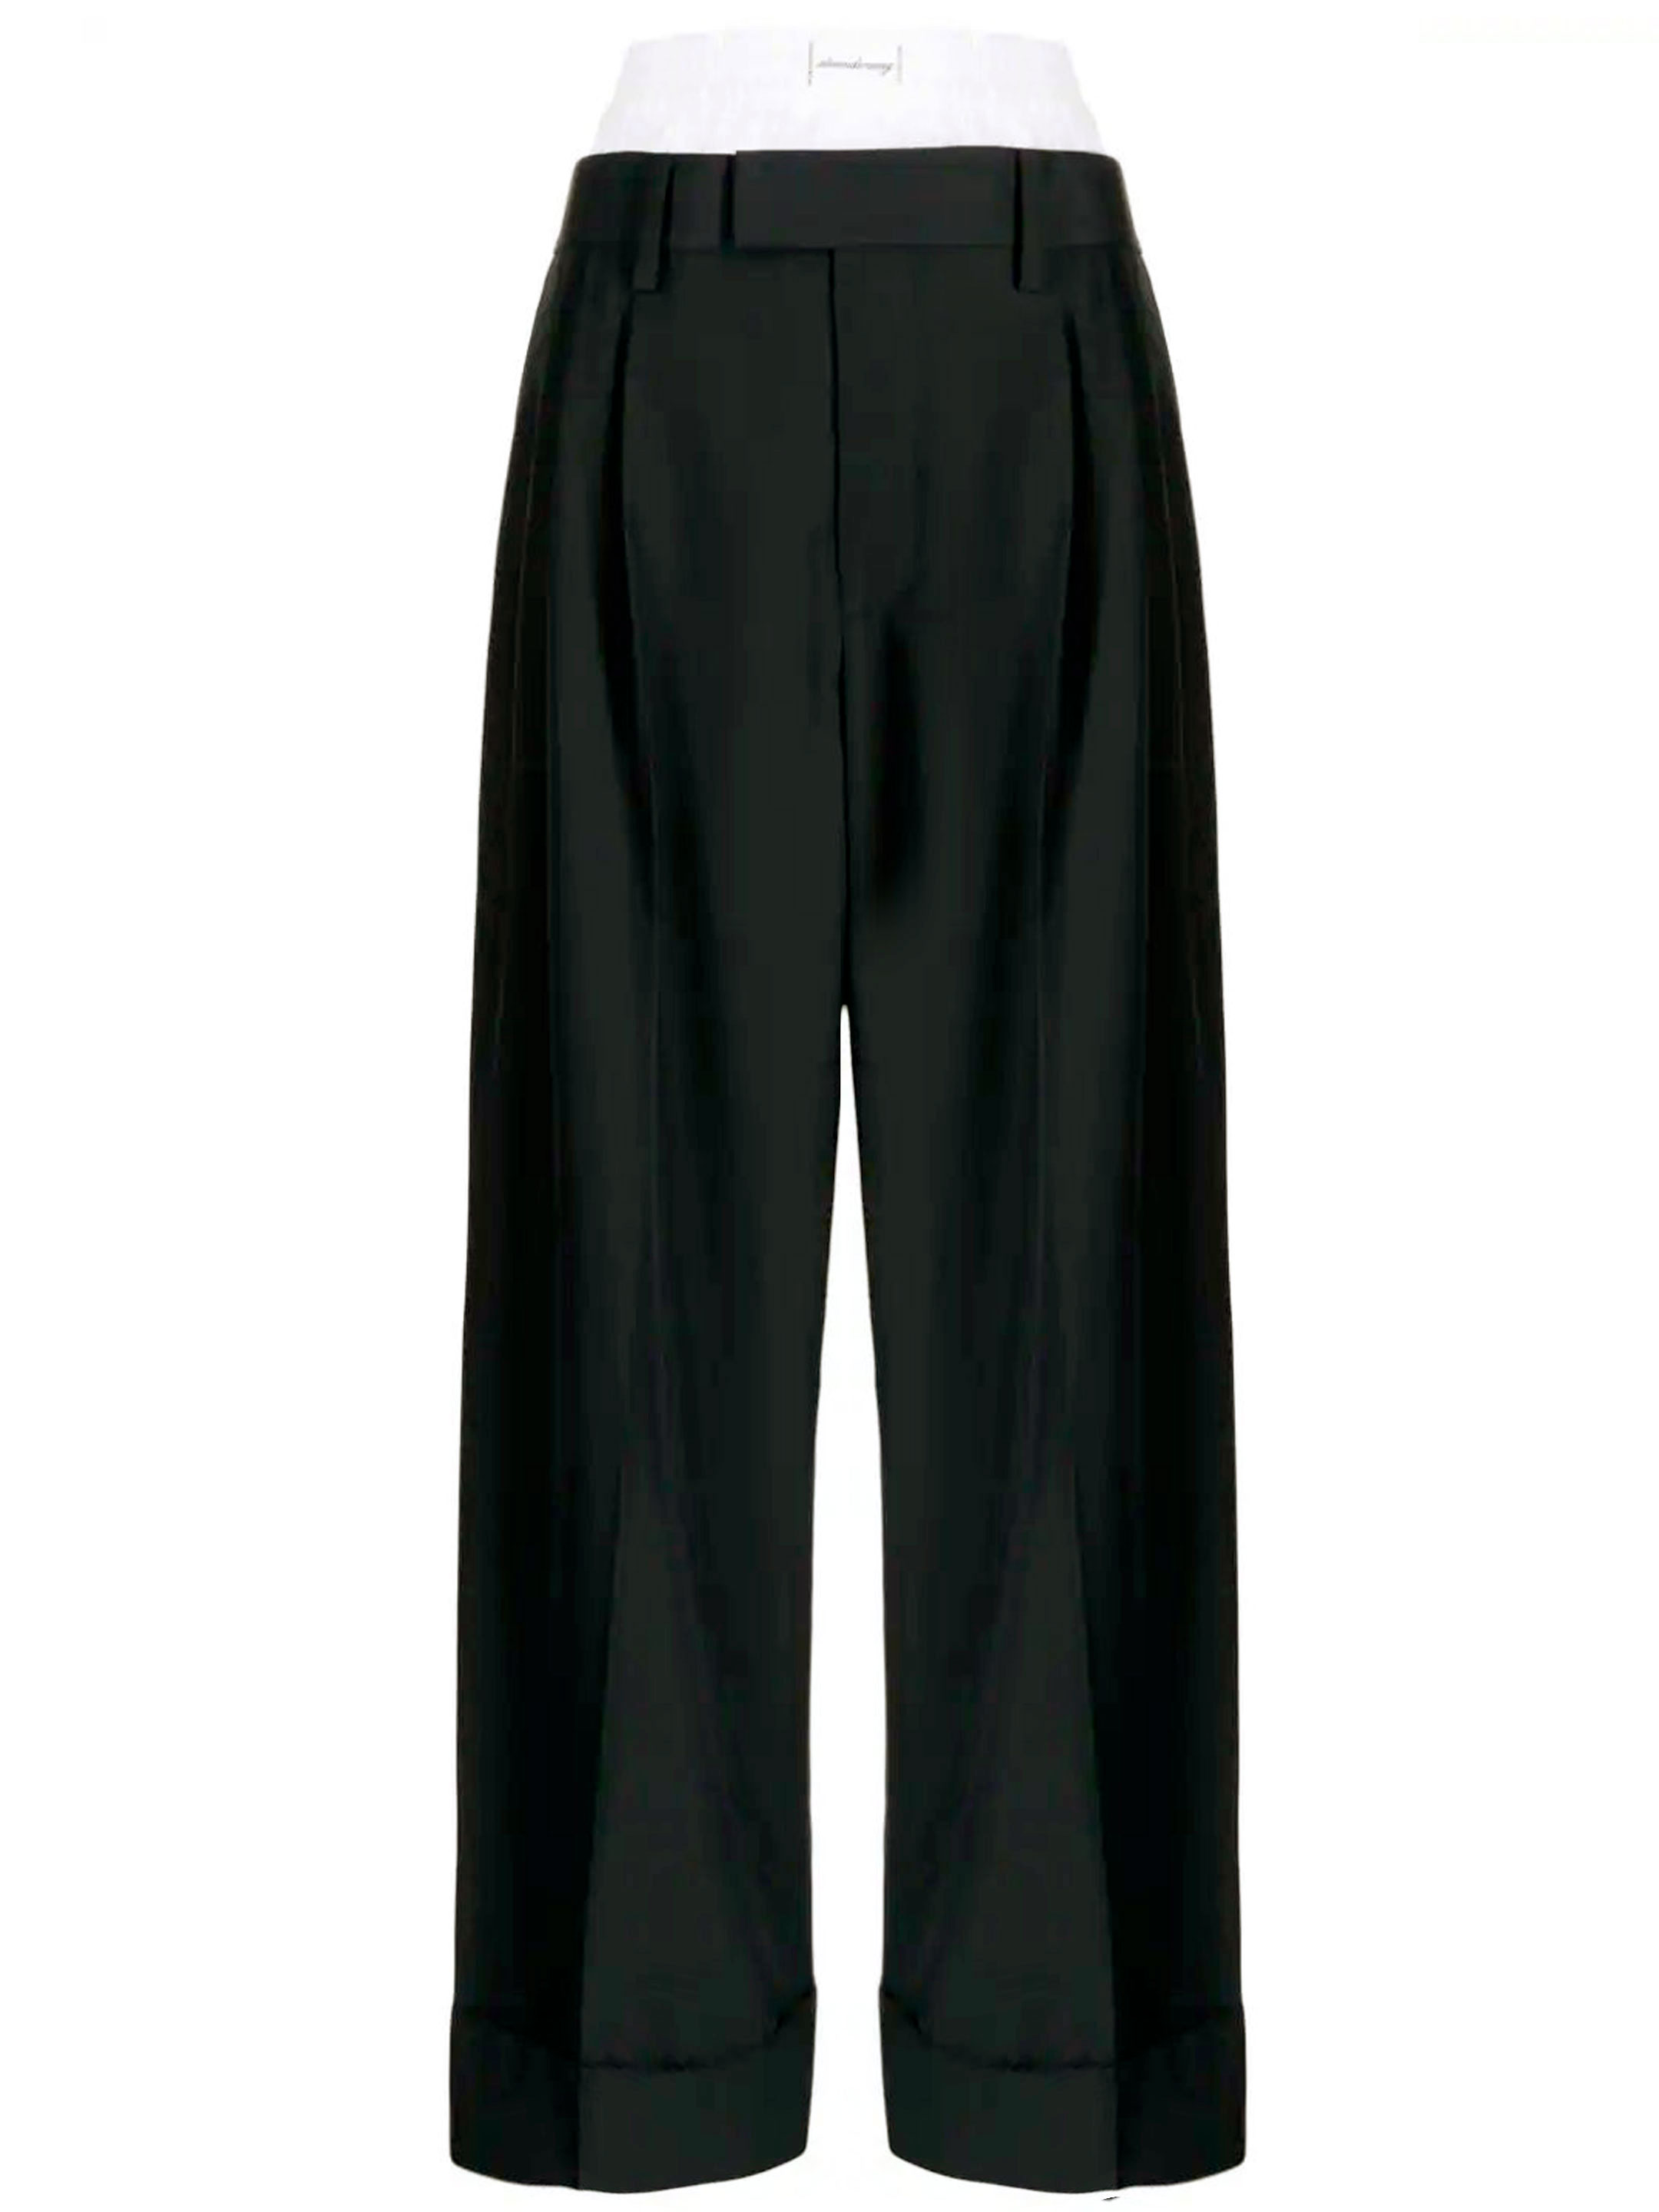 ALEXANDER WANG - Layered tailored trousers | Leam Roma - Luxury ...